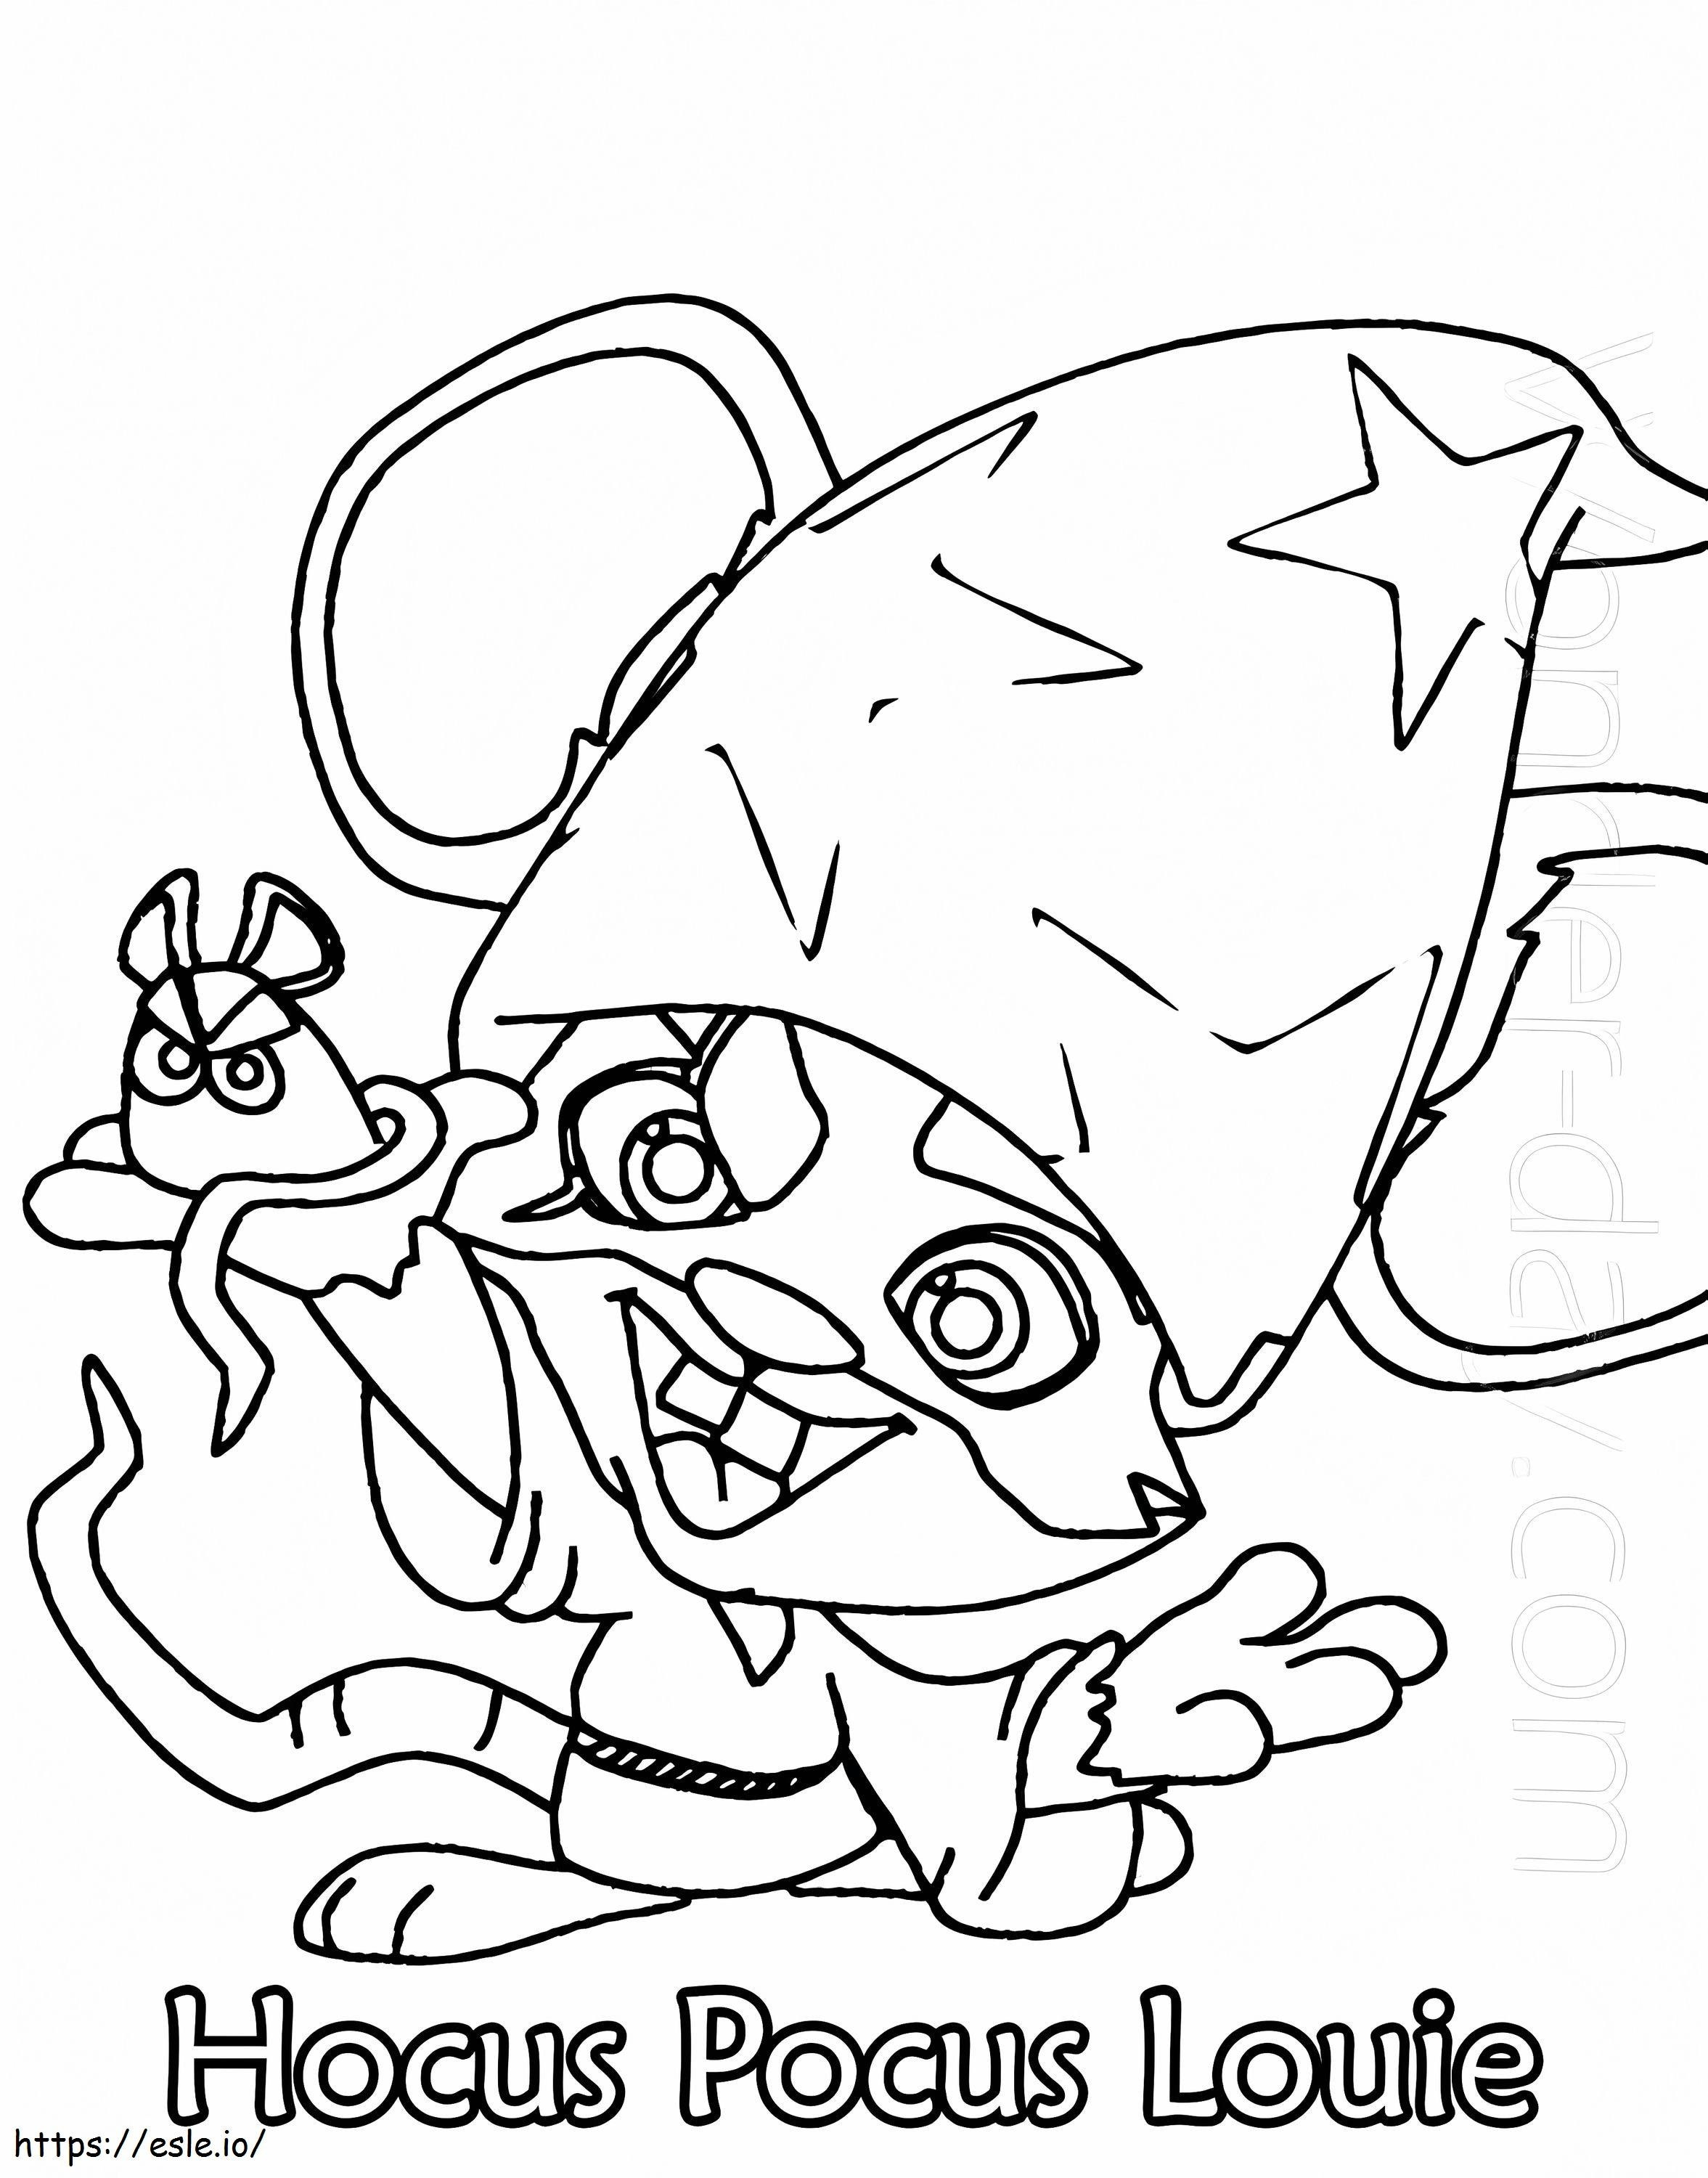 Hocus Pocus Louie Zooba coloring page